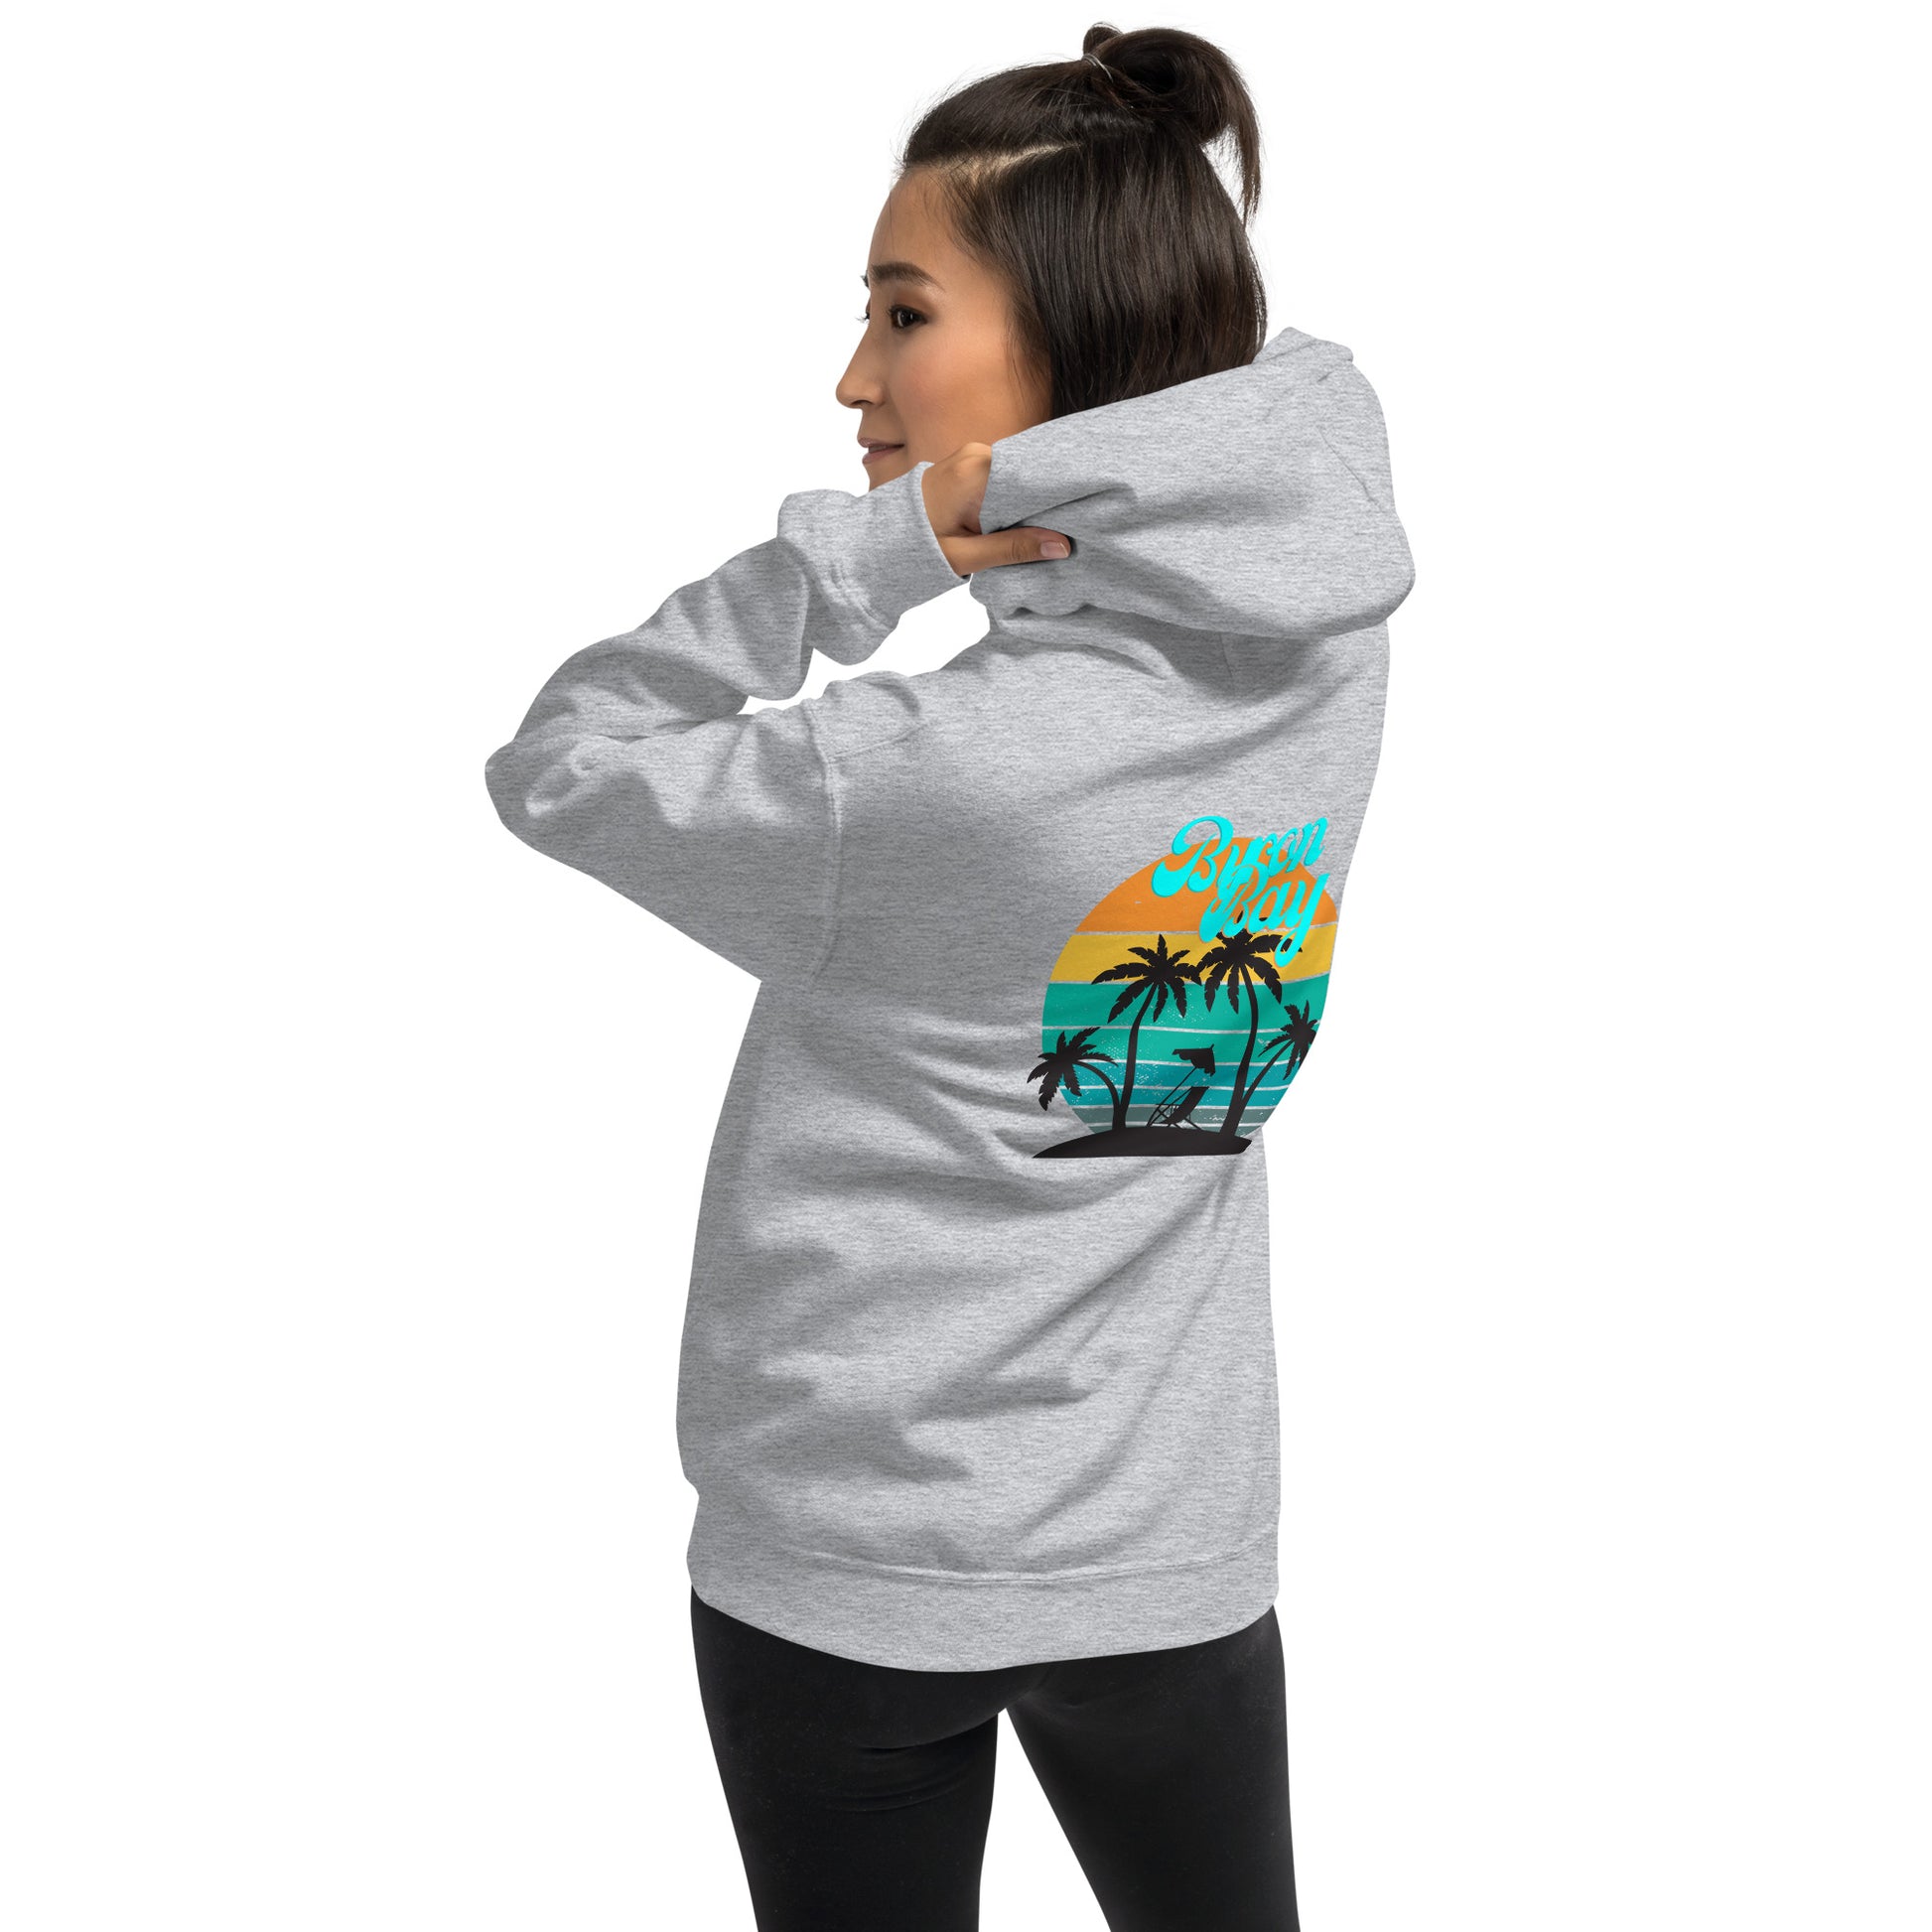  Unisex Hoodie - Sport Grey - Side back view being warn by woman pulling the hood on looking back over her shoulder - Byron Bay design on back, plain front with pouch pocket - Genuine Byron Bay Merchandise | Produced by Go Sea Kayak Byron Bay 